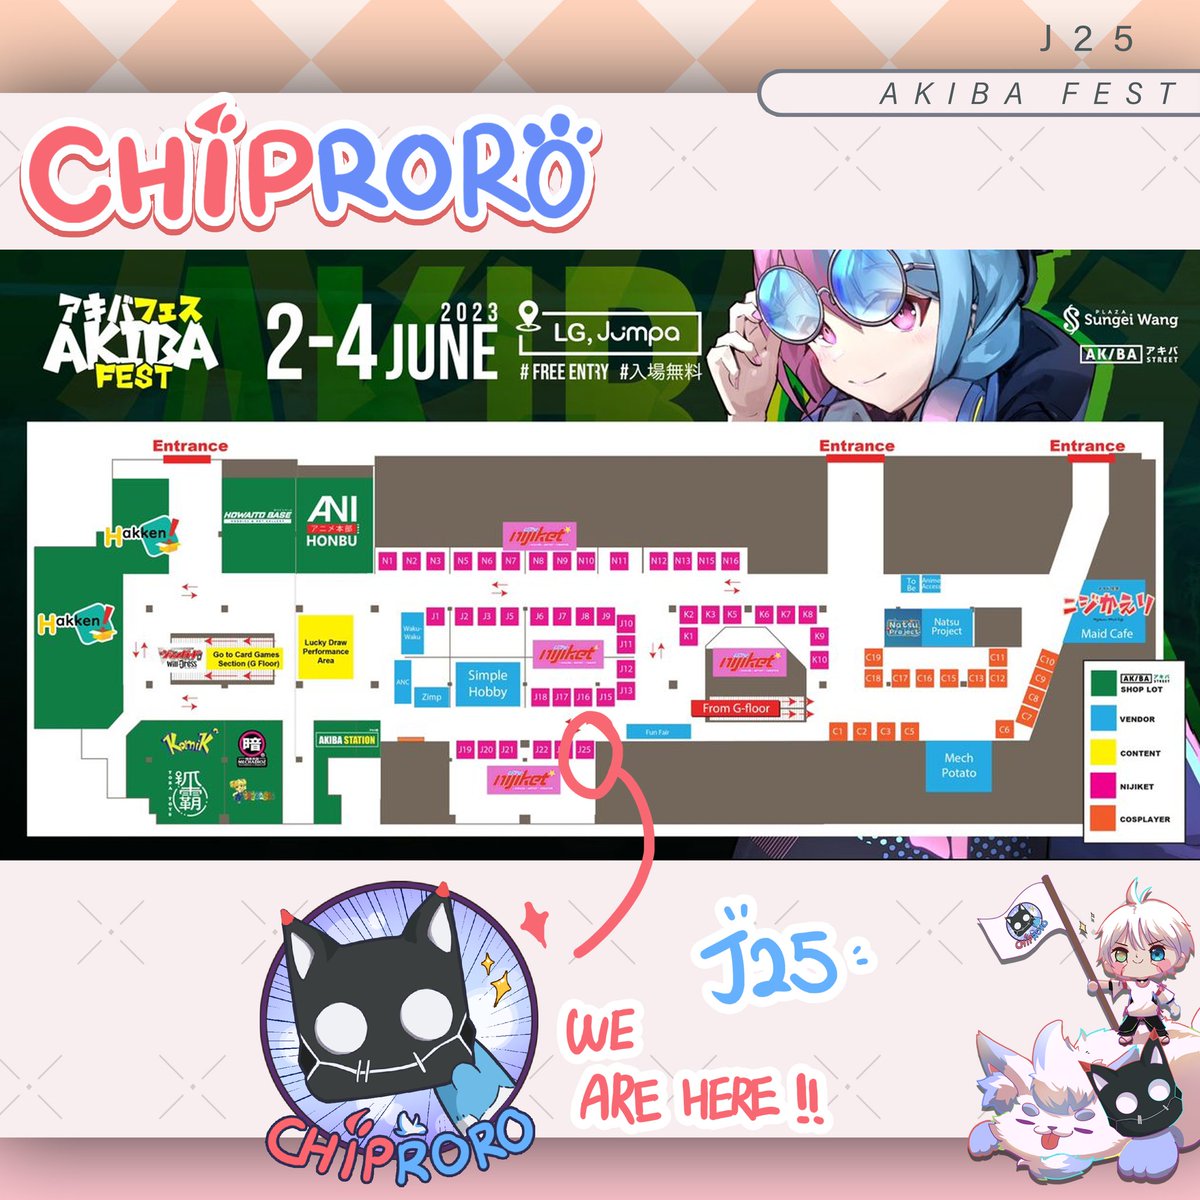 Akiba Fest 2023!! Come to find us at Sungei Wang~
.
#artbooth #akibafest #anime #animebooth #Merchandise #animeevent #Malaysia